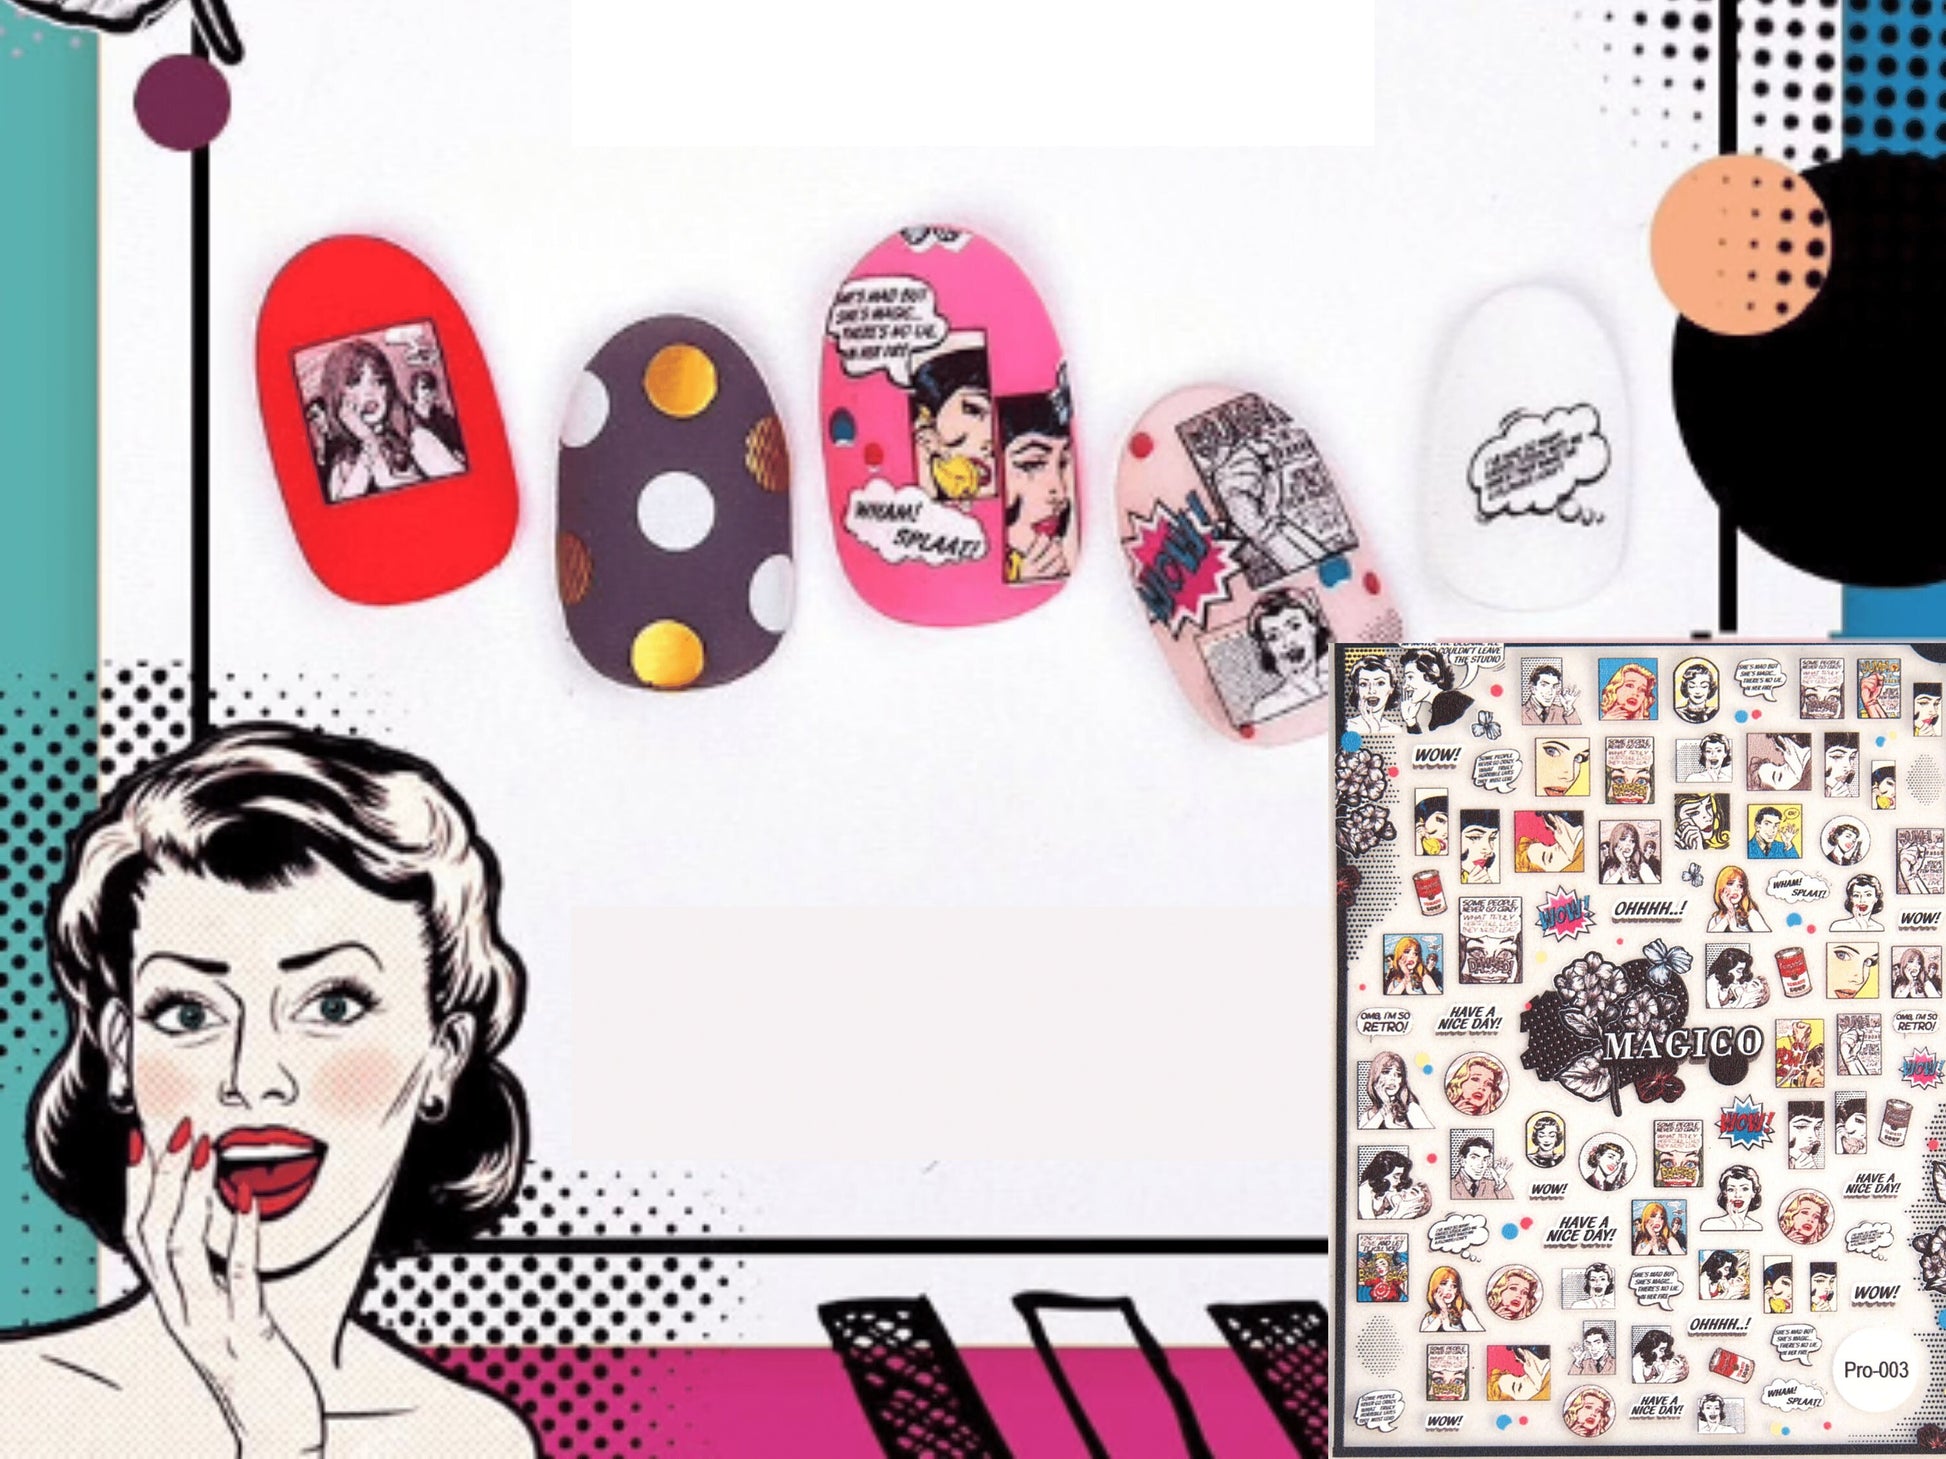 Pin-up Girl Nail Art Sticker/Pop art 1950's Vintage Style DIY Tips Guides Transfer Ultra thin Stickers/ American Character Animation sticker